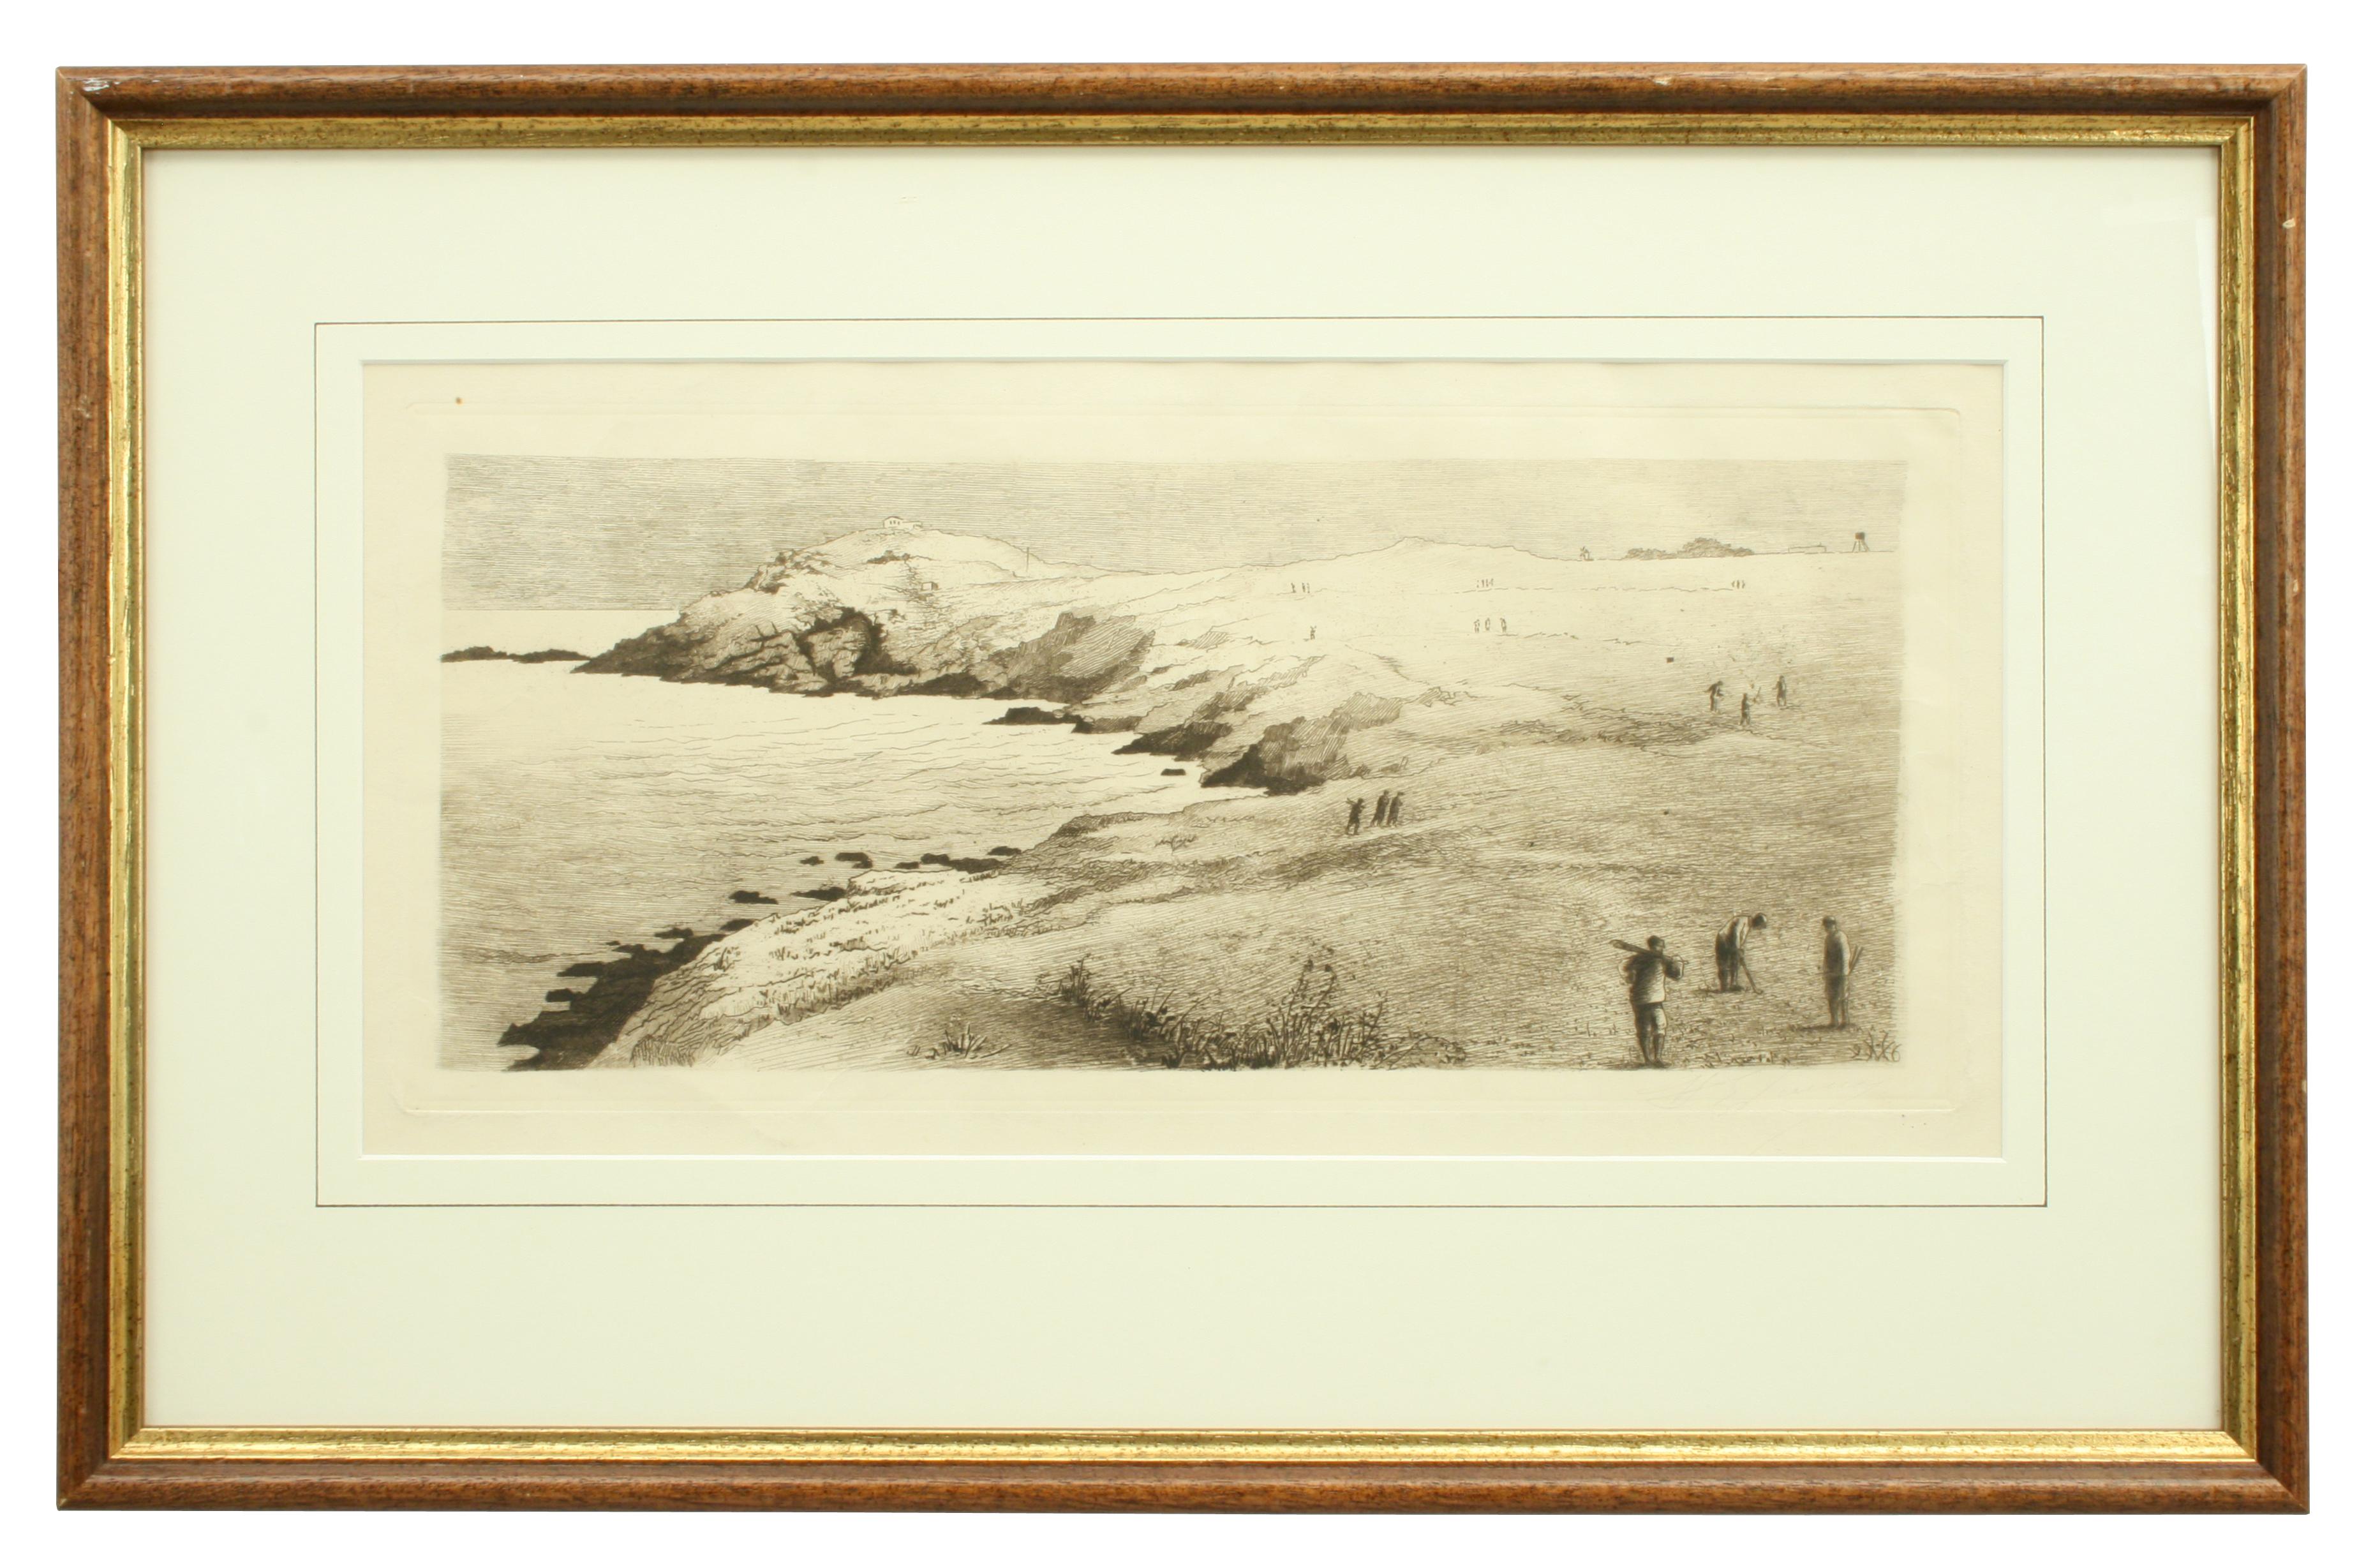 Golf drypoint etching.
This drypoint etching of a clifftop golf course is fascinating for the fact that the golfers and caddies depicted are all carrying their clubs by hand with no golf bags to be seen thus indicating that it was executed in the